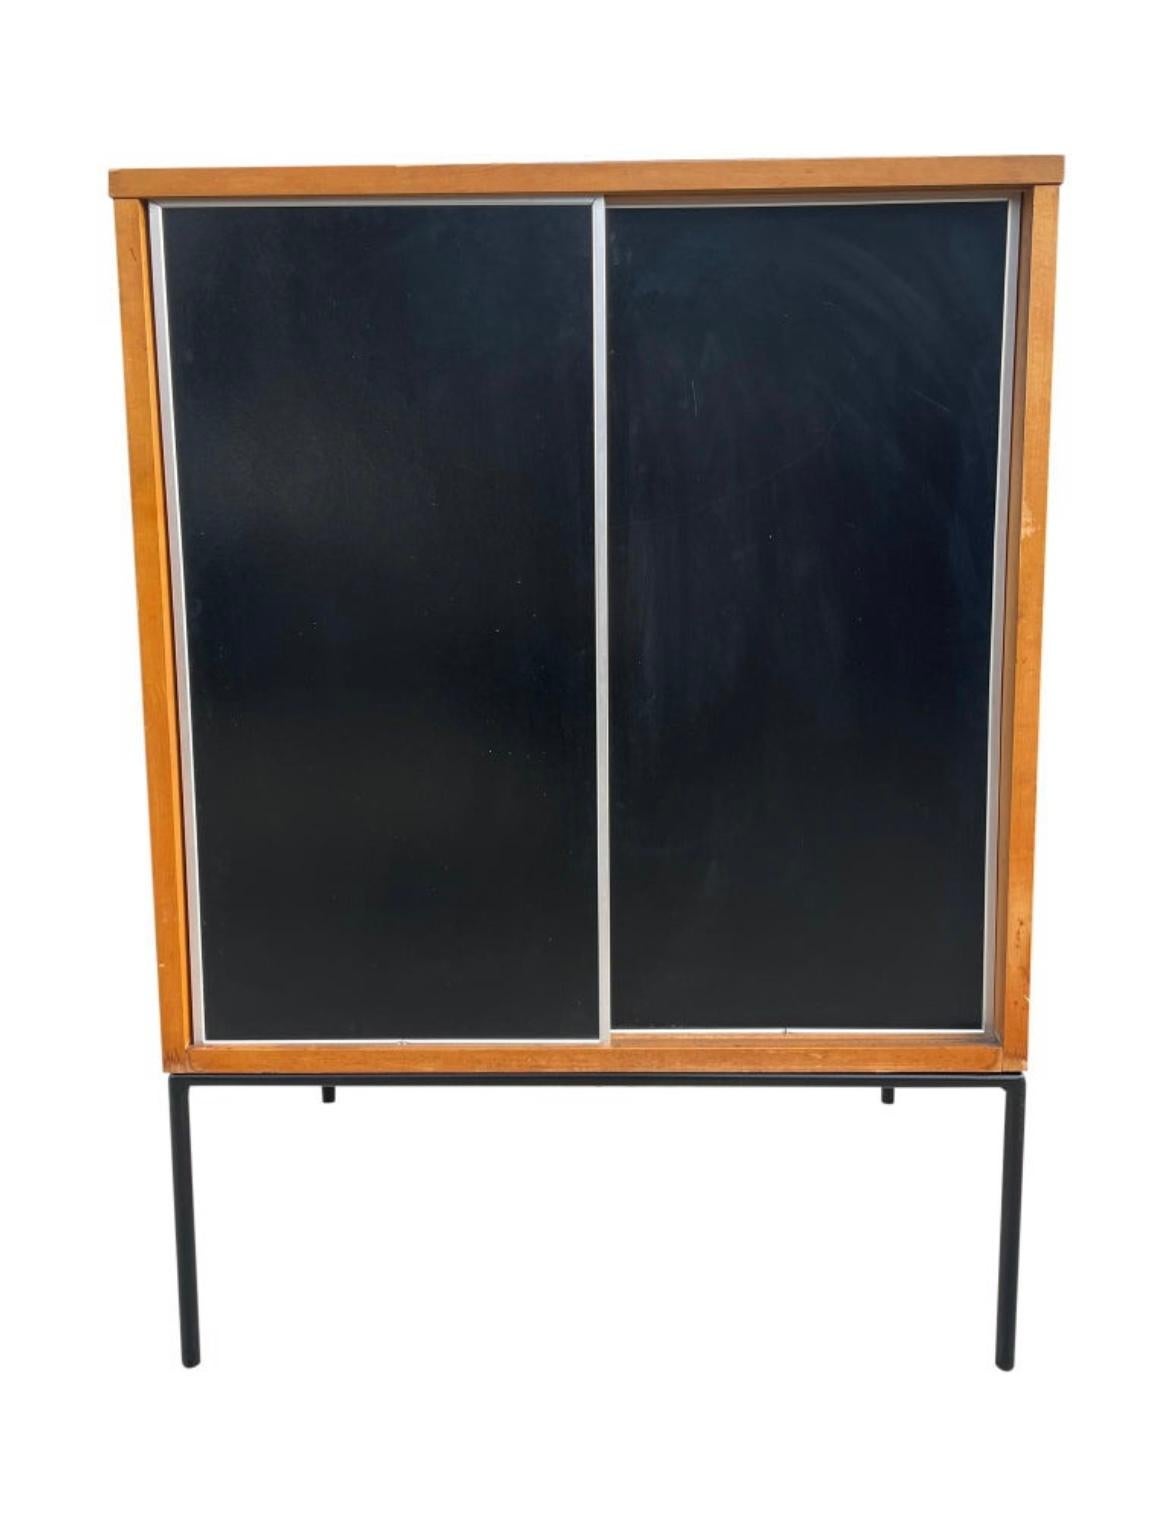 Beautiful midcentury small cabinet by Paul McCobb circa 1950 Planner Group #1512 has 1 fixed shelf - solid maple construction has a blonde lacquer finish. Has very rare all original black & white aluminum trim sliding front doors sits on an iron